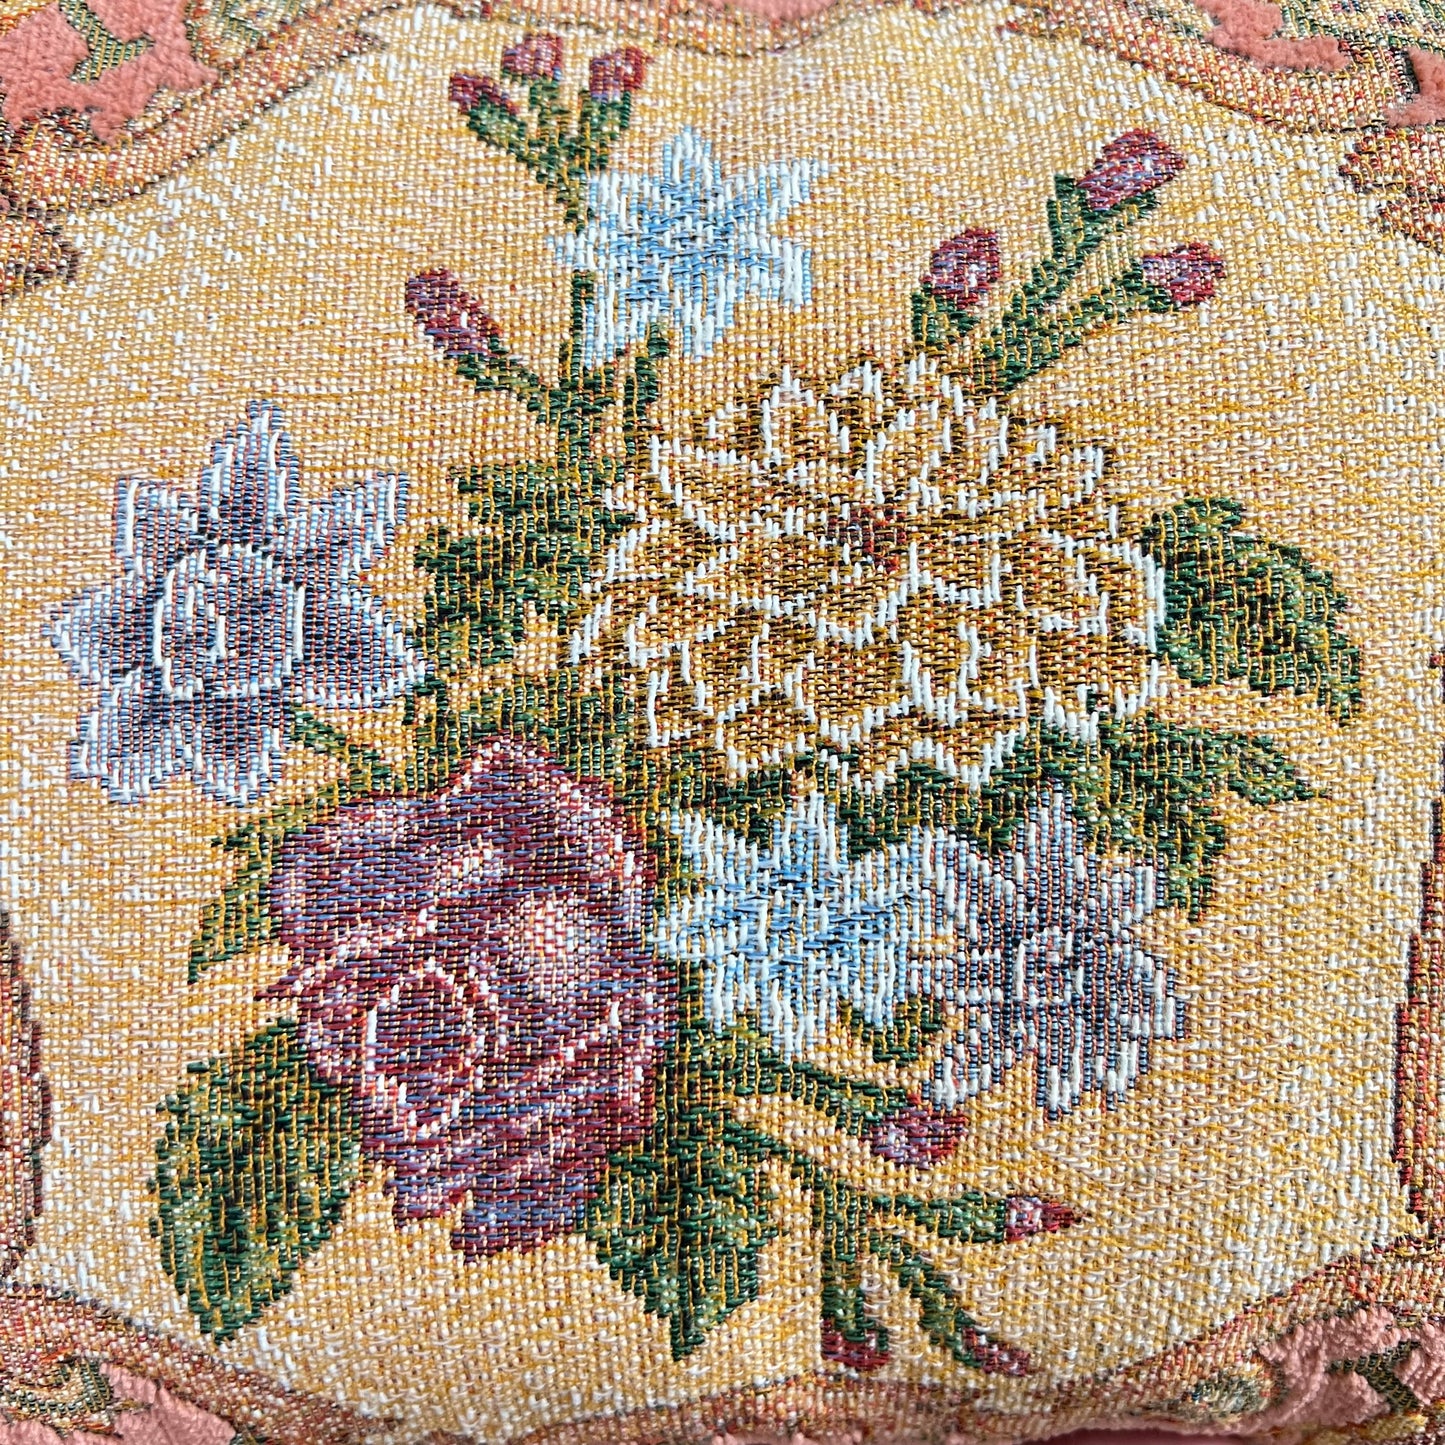 Beautiful Vintage Needlepoint Floral Pillow 15x9.5